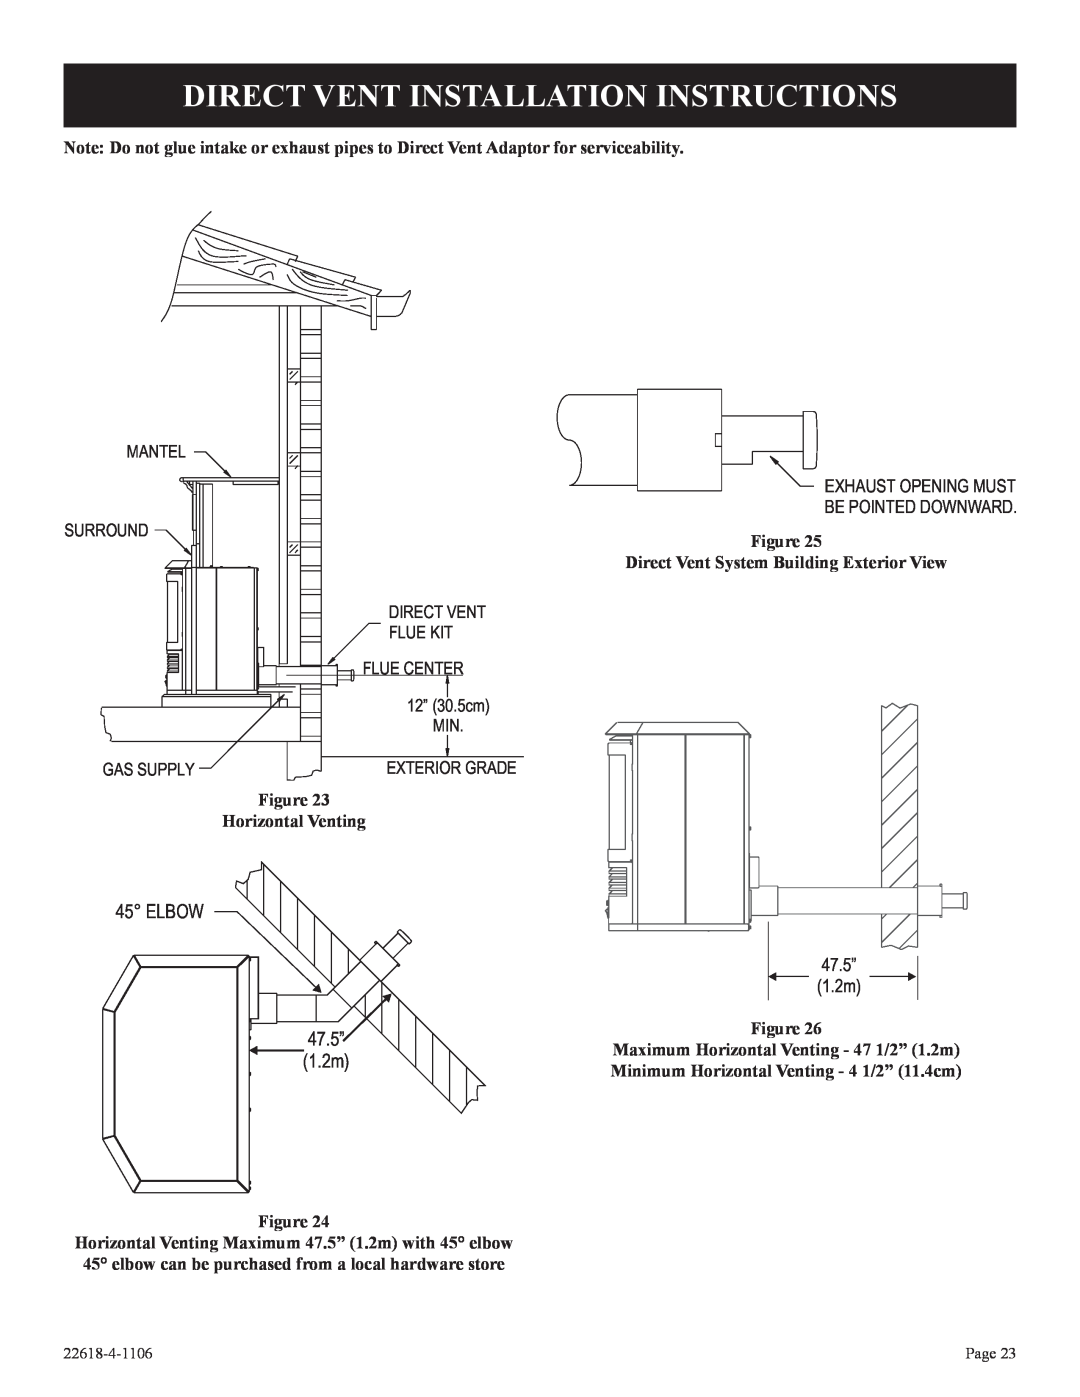 GN National Electric CP, GN Direct Vent Installation Instructions, Elbow, 47.5”, 1.2m, Surround, Figure Horizontal Venting 